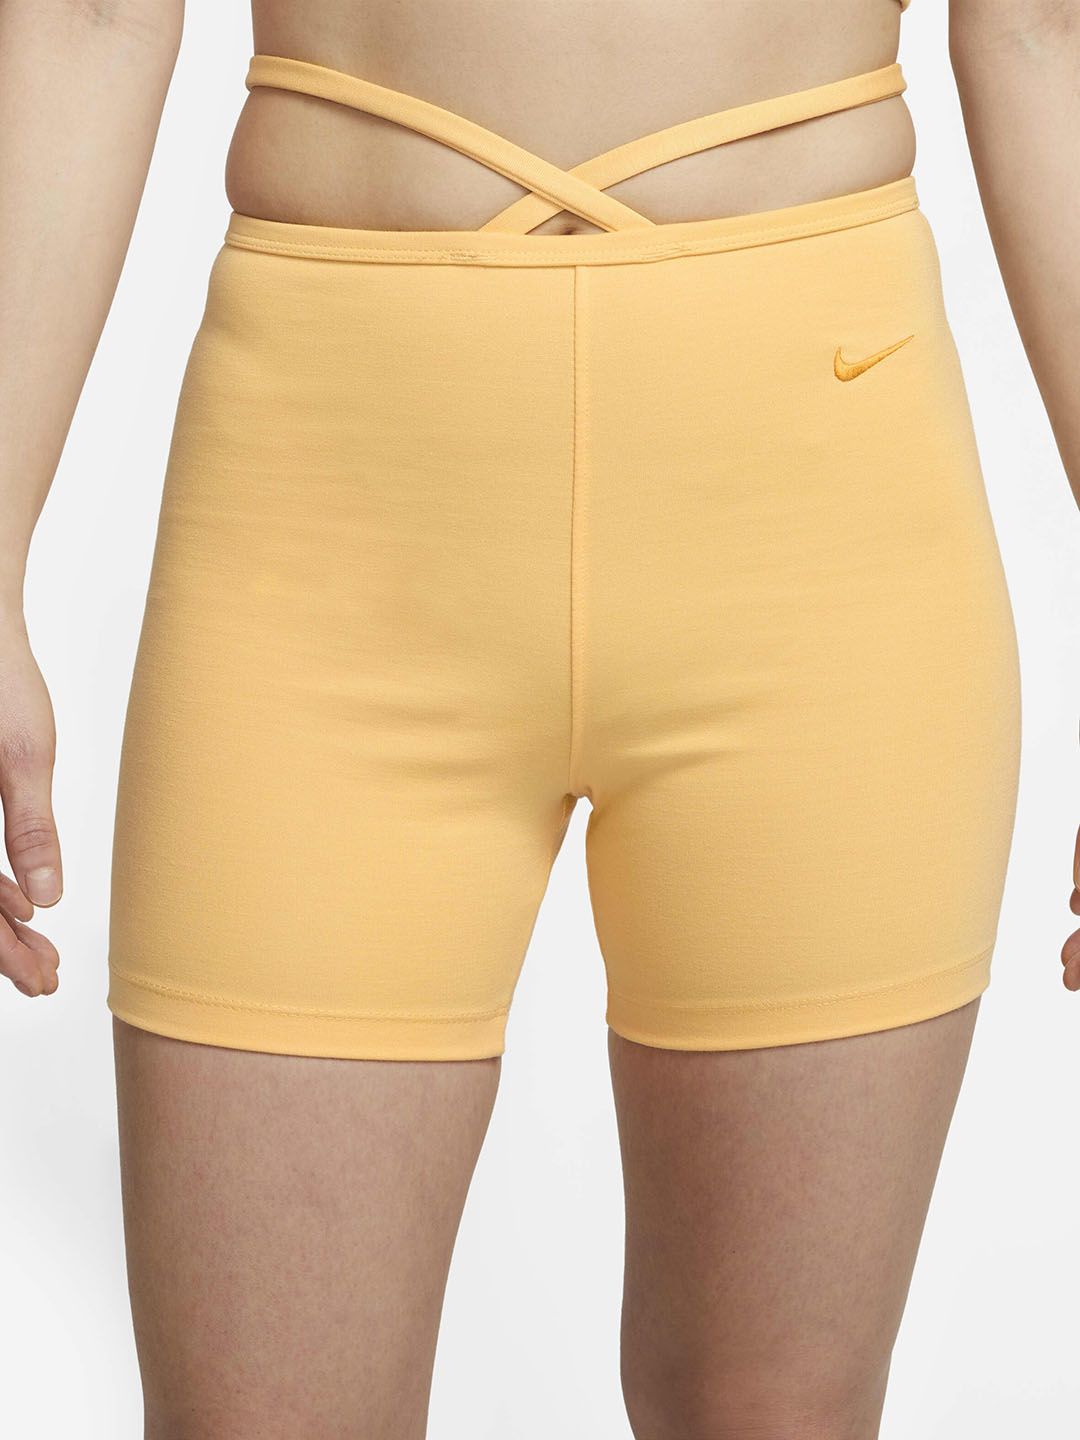 Nike Women High-Rise Sports Shorts Price in India